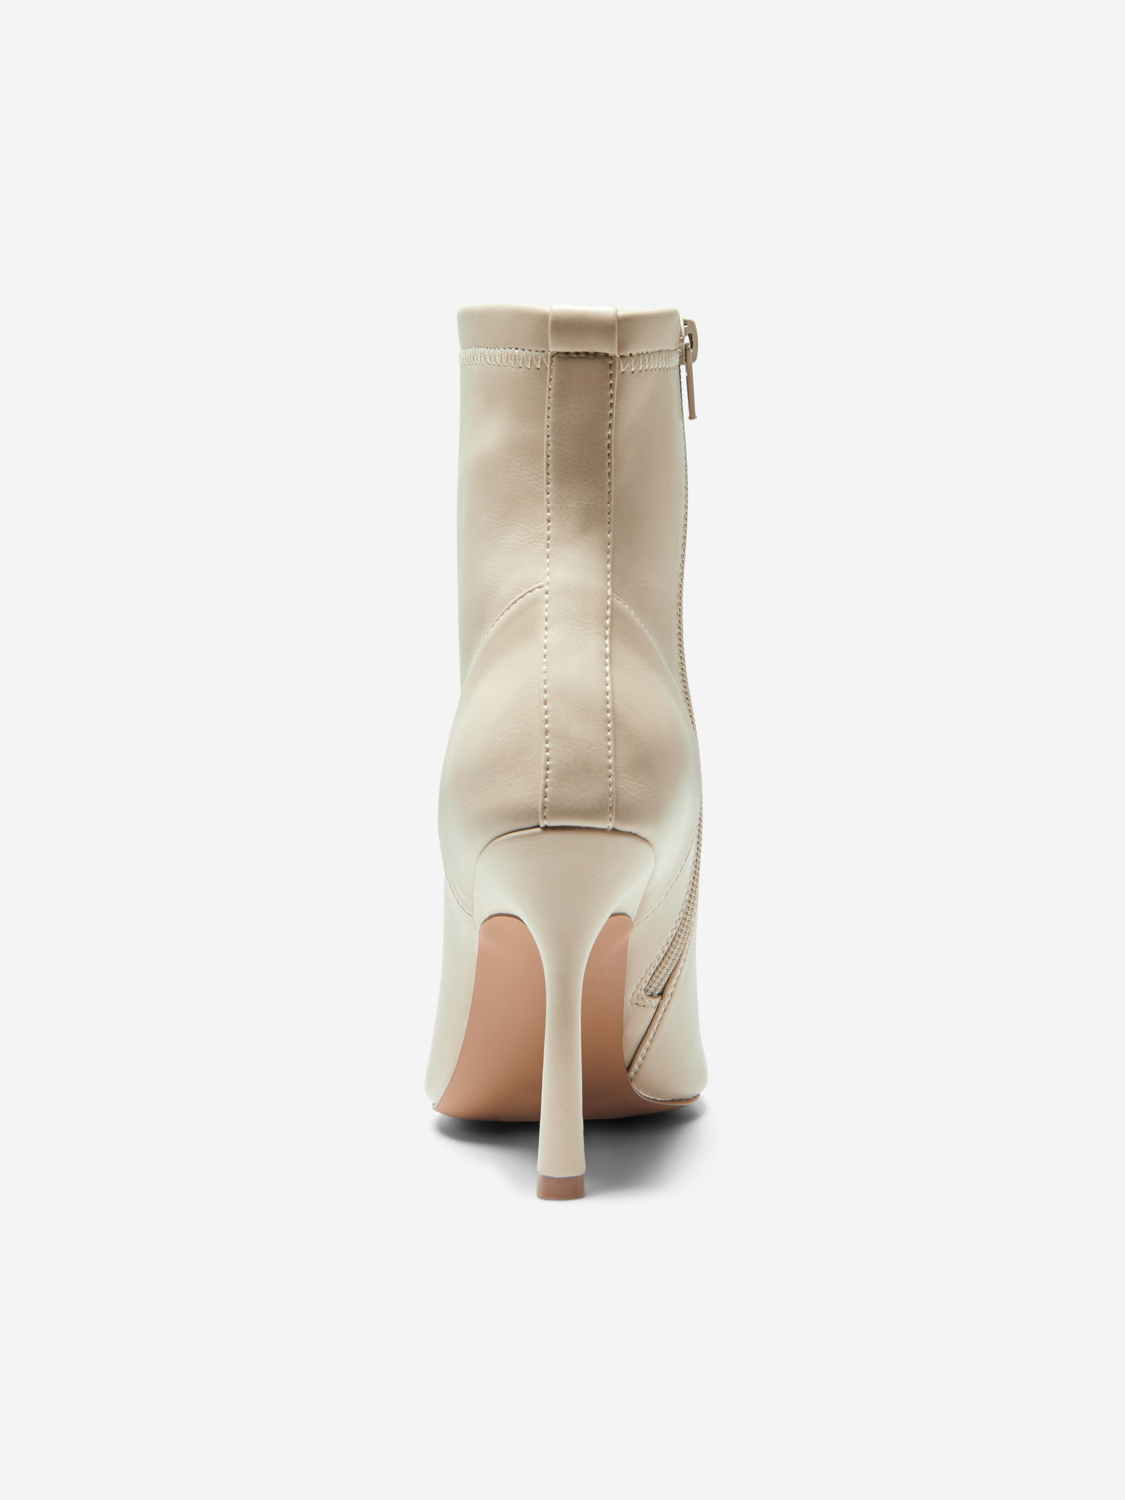 Cali stiletto heel ankle boots, CREME, large